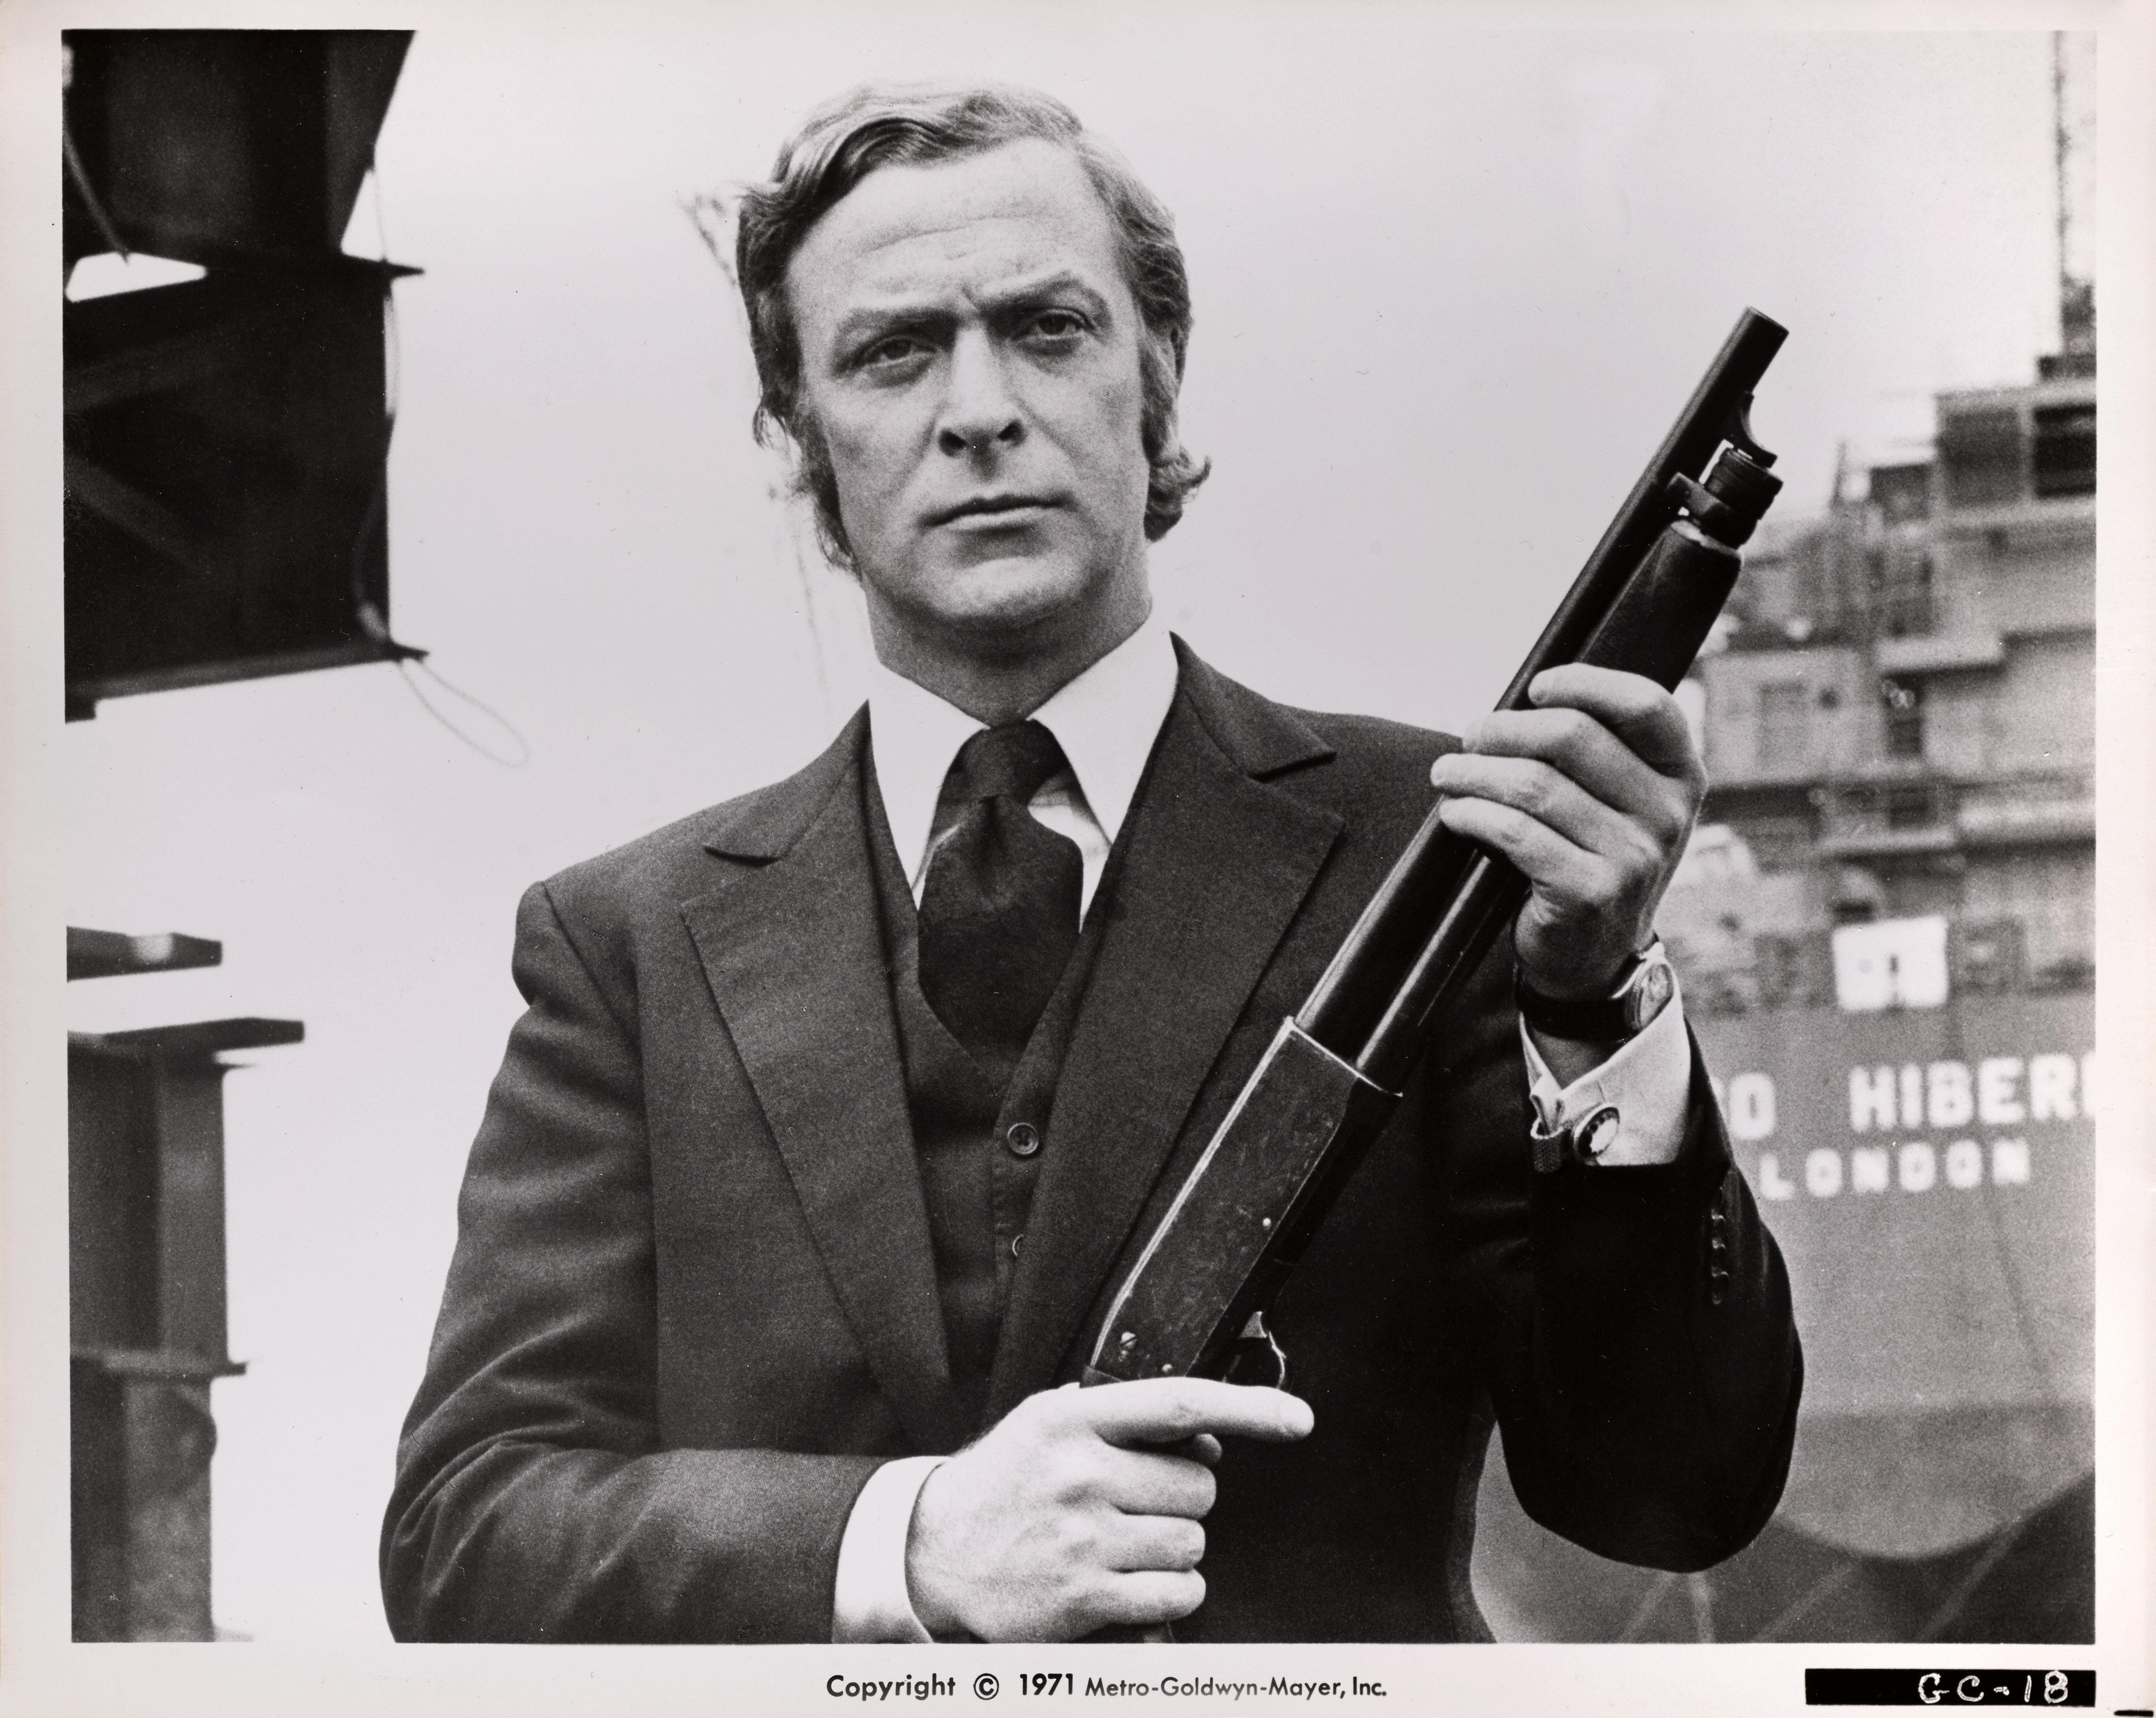 Original US production still for Michael Caine's Classic, 1971 gangster thriller.
Directed by Mike Hodges.